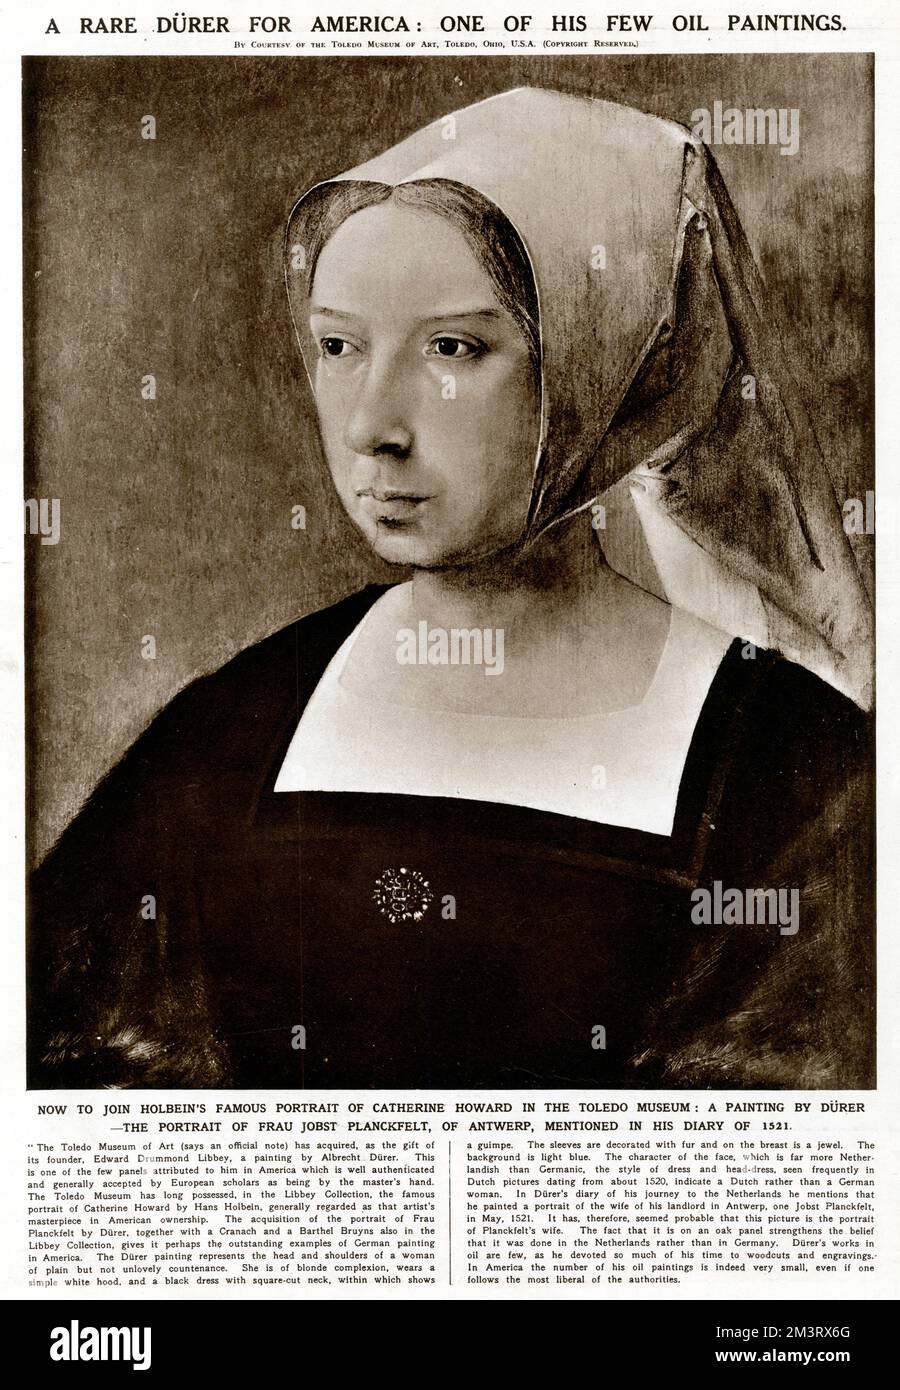 Page from The Illustrated London News reporting on a rare oil painting by Albrecht Durer of Frau Jobst Planckfelt of Antwerp, mentioned in his diary of 1521.  The painting was acquired by the Toledo Museum of Art, a gift of its founder, Edward Drummond Libbey.  1936 Stock Photo